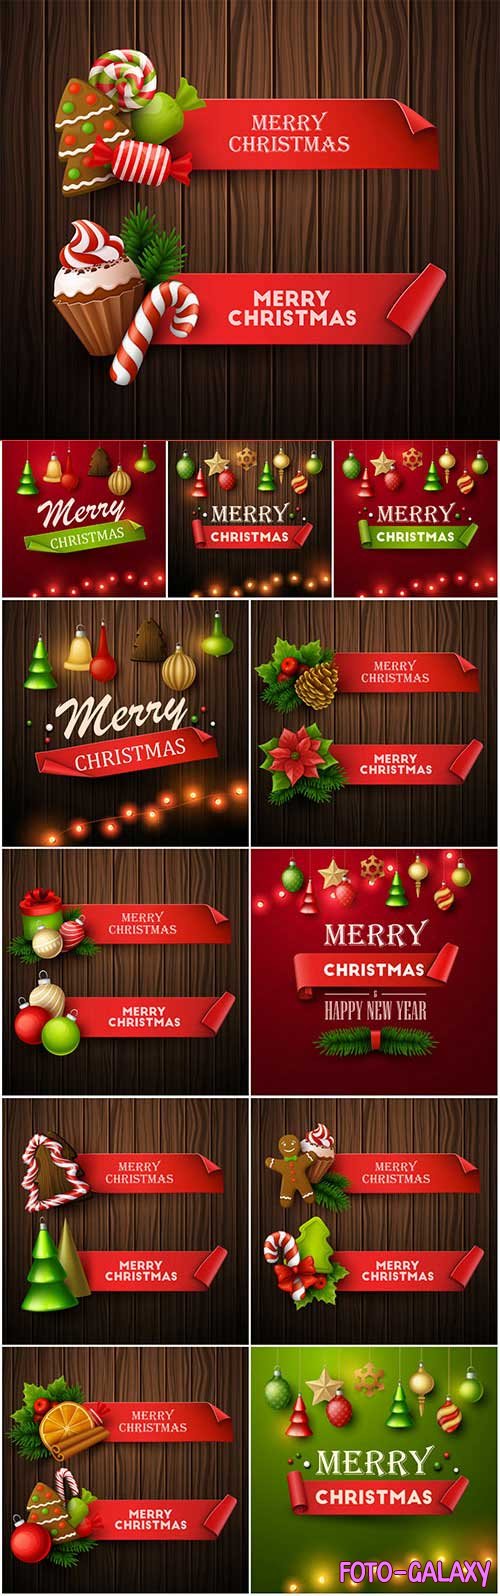 New Year and Christmas vector vol 7